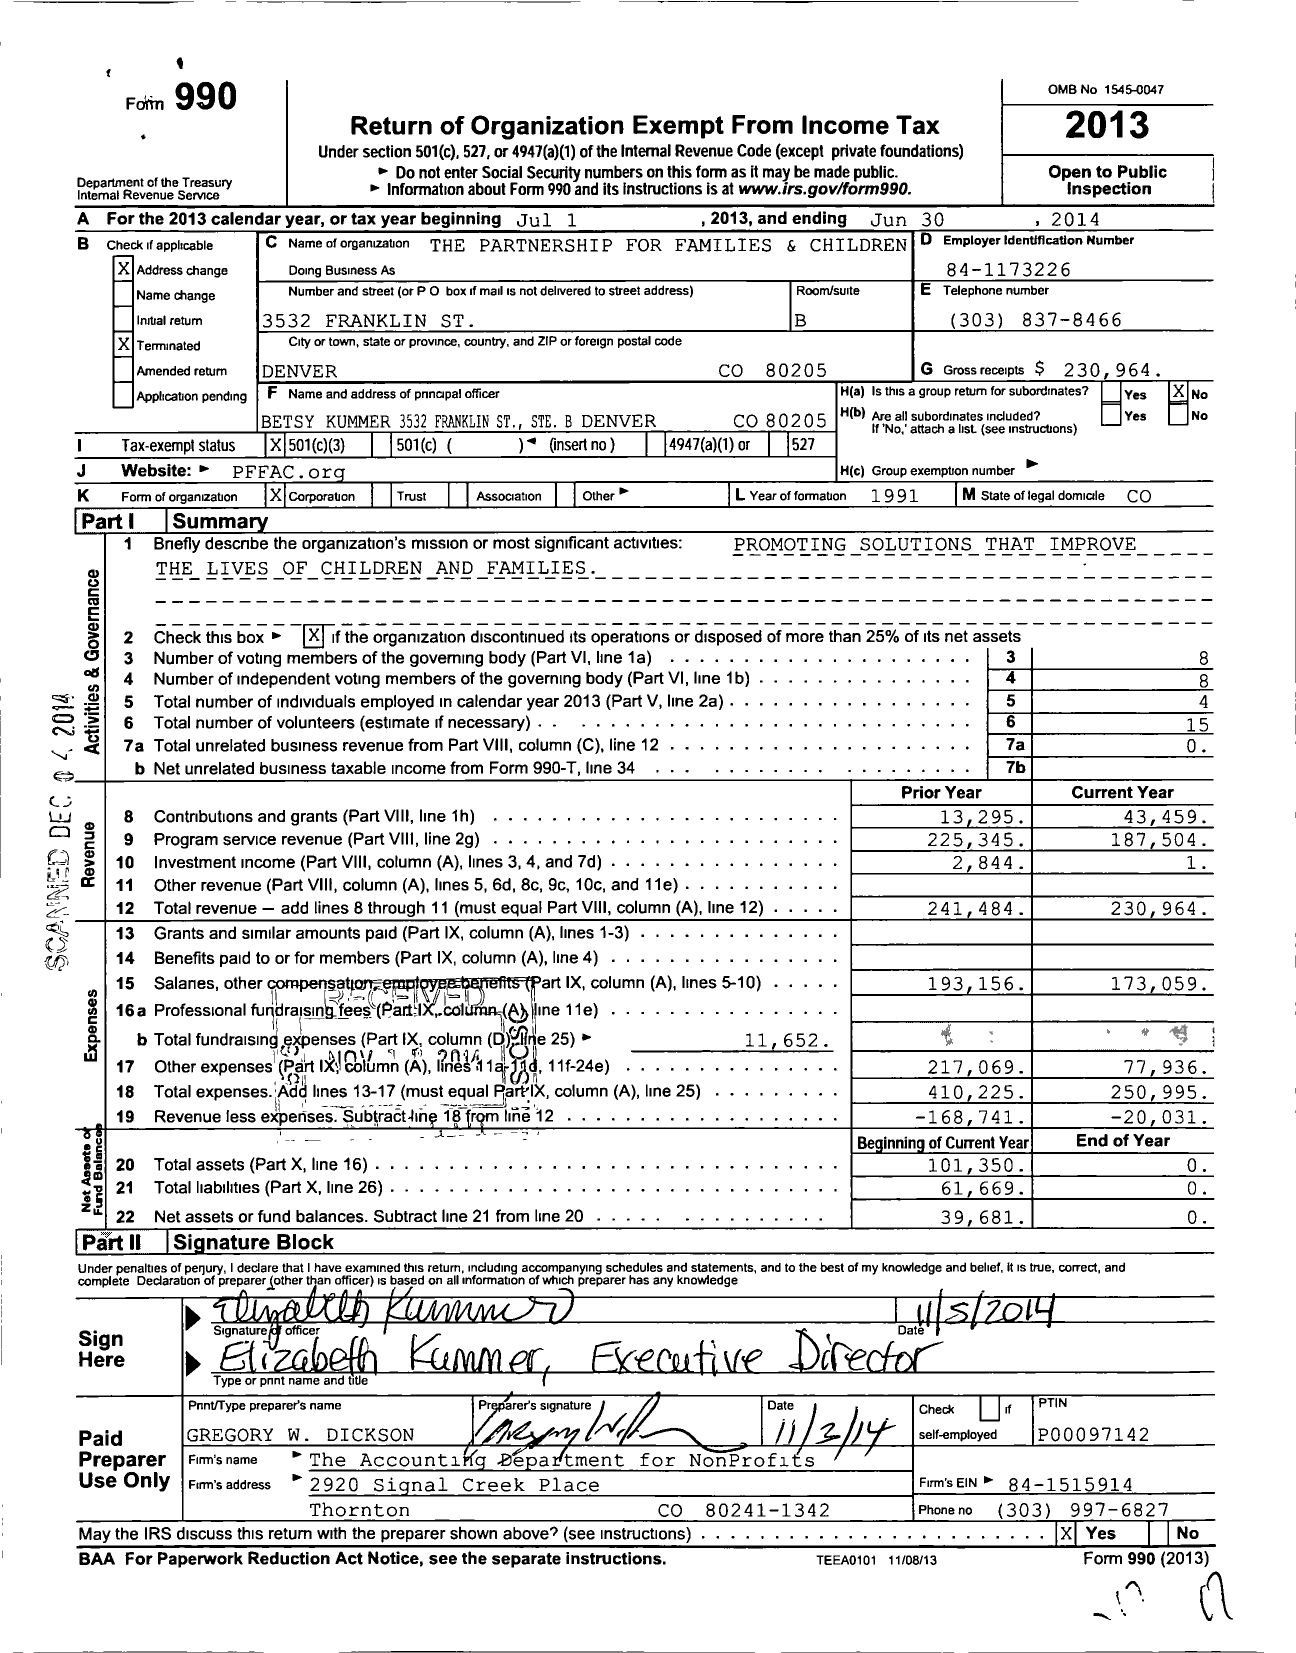 Image of first page of 2013 Form 990 for Partnership for Families and Children